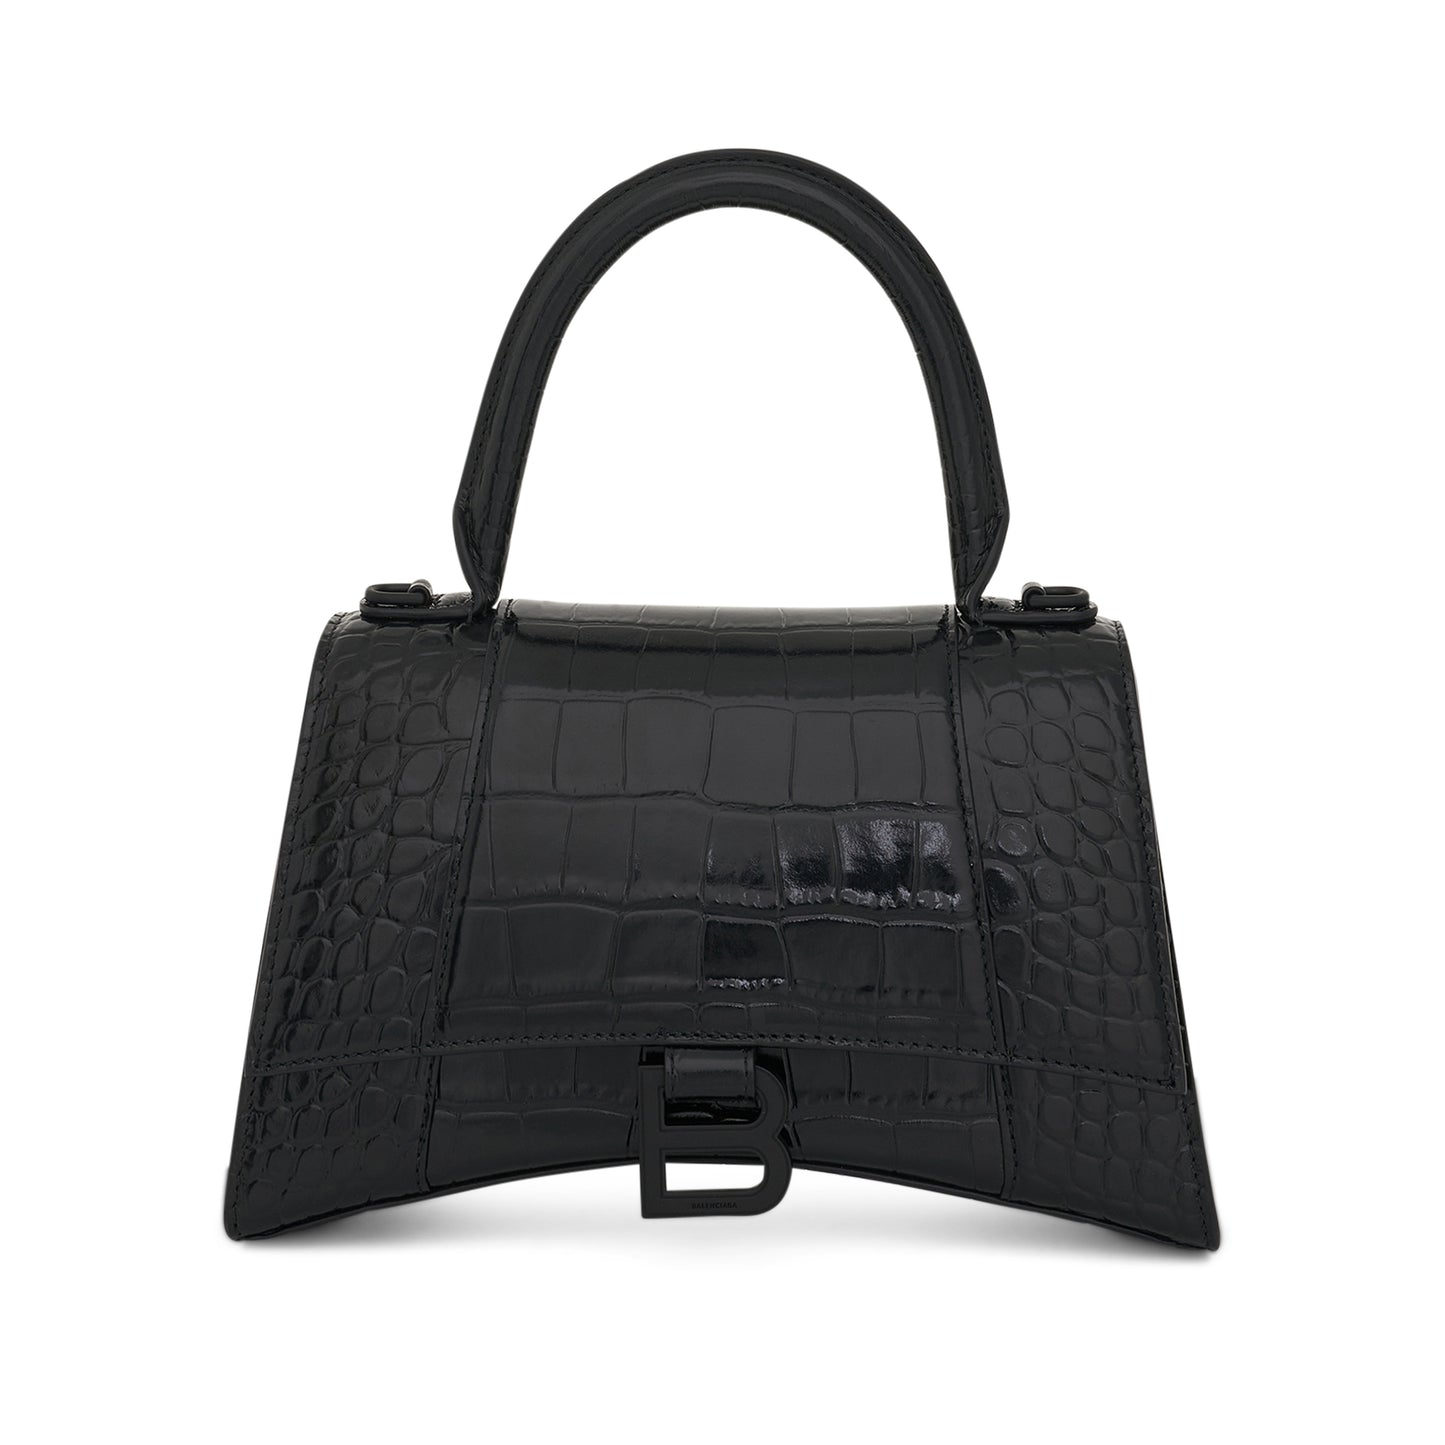 Hourglass Small Croco Embossed Bag in Black